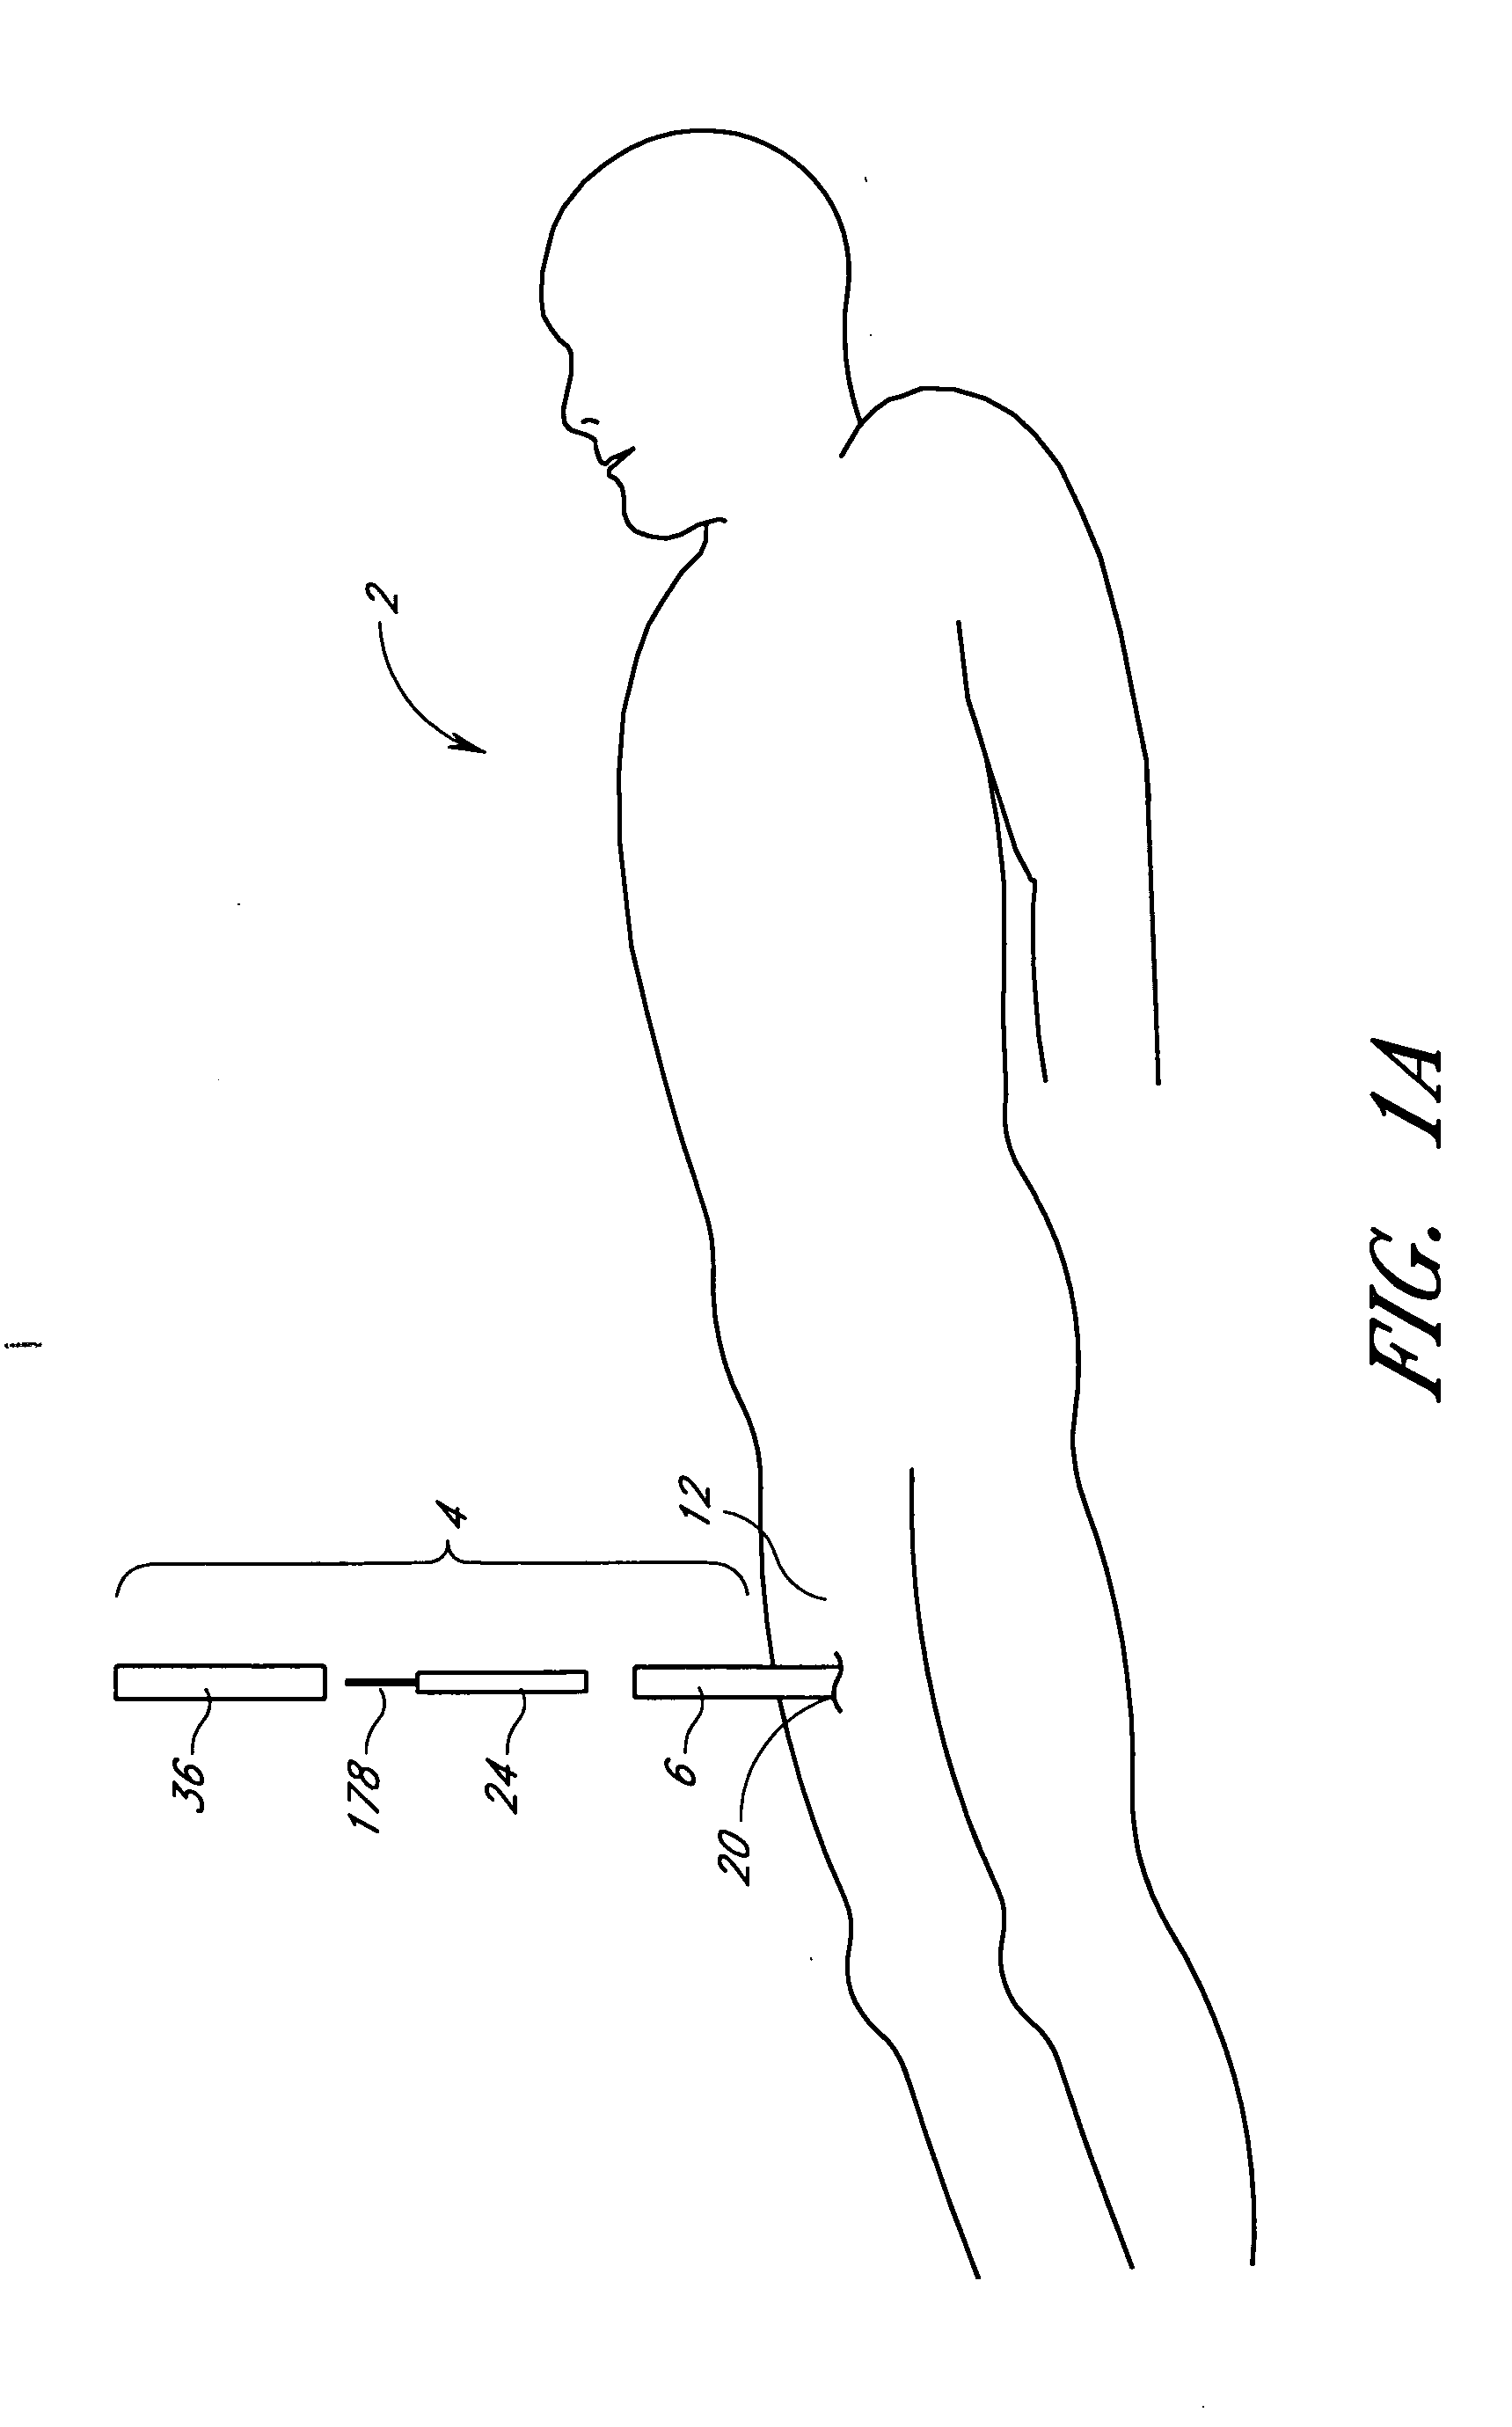 Suturing device and method for sealing an opening in a blood vessel or other biological structure